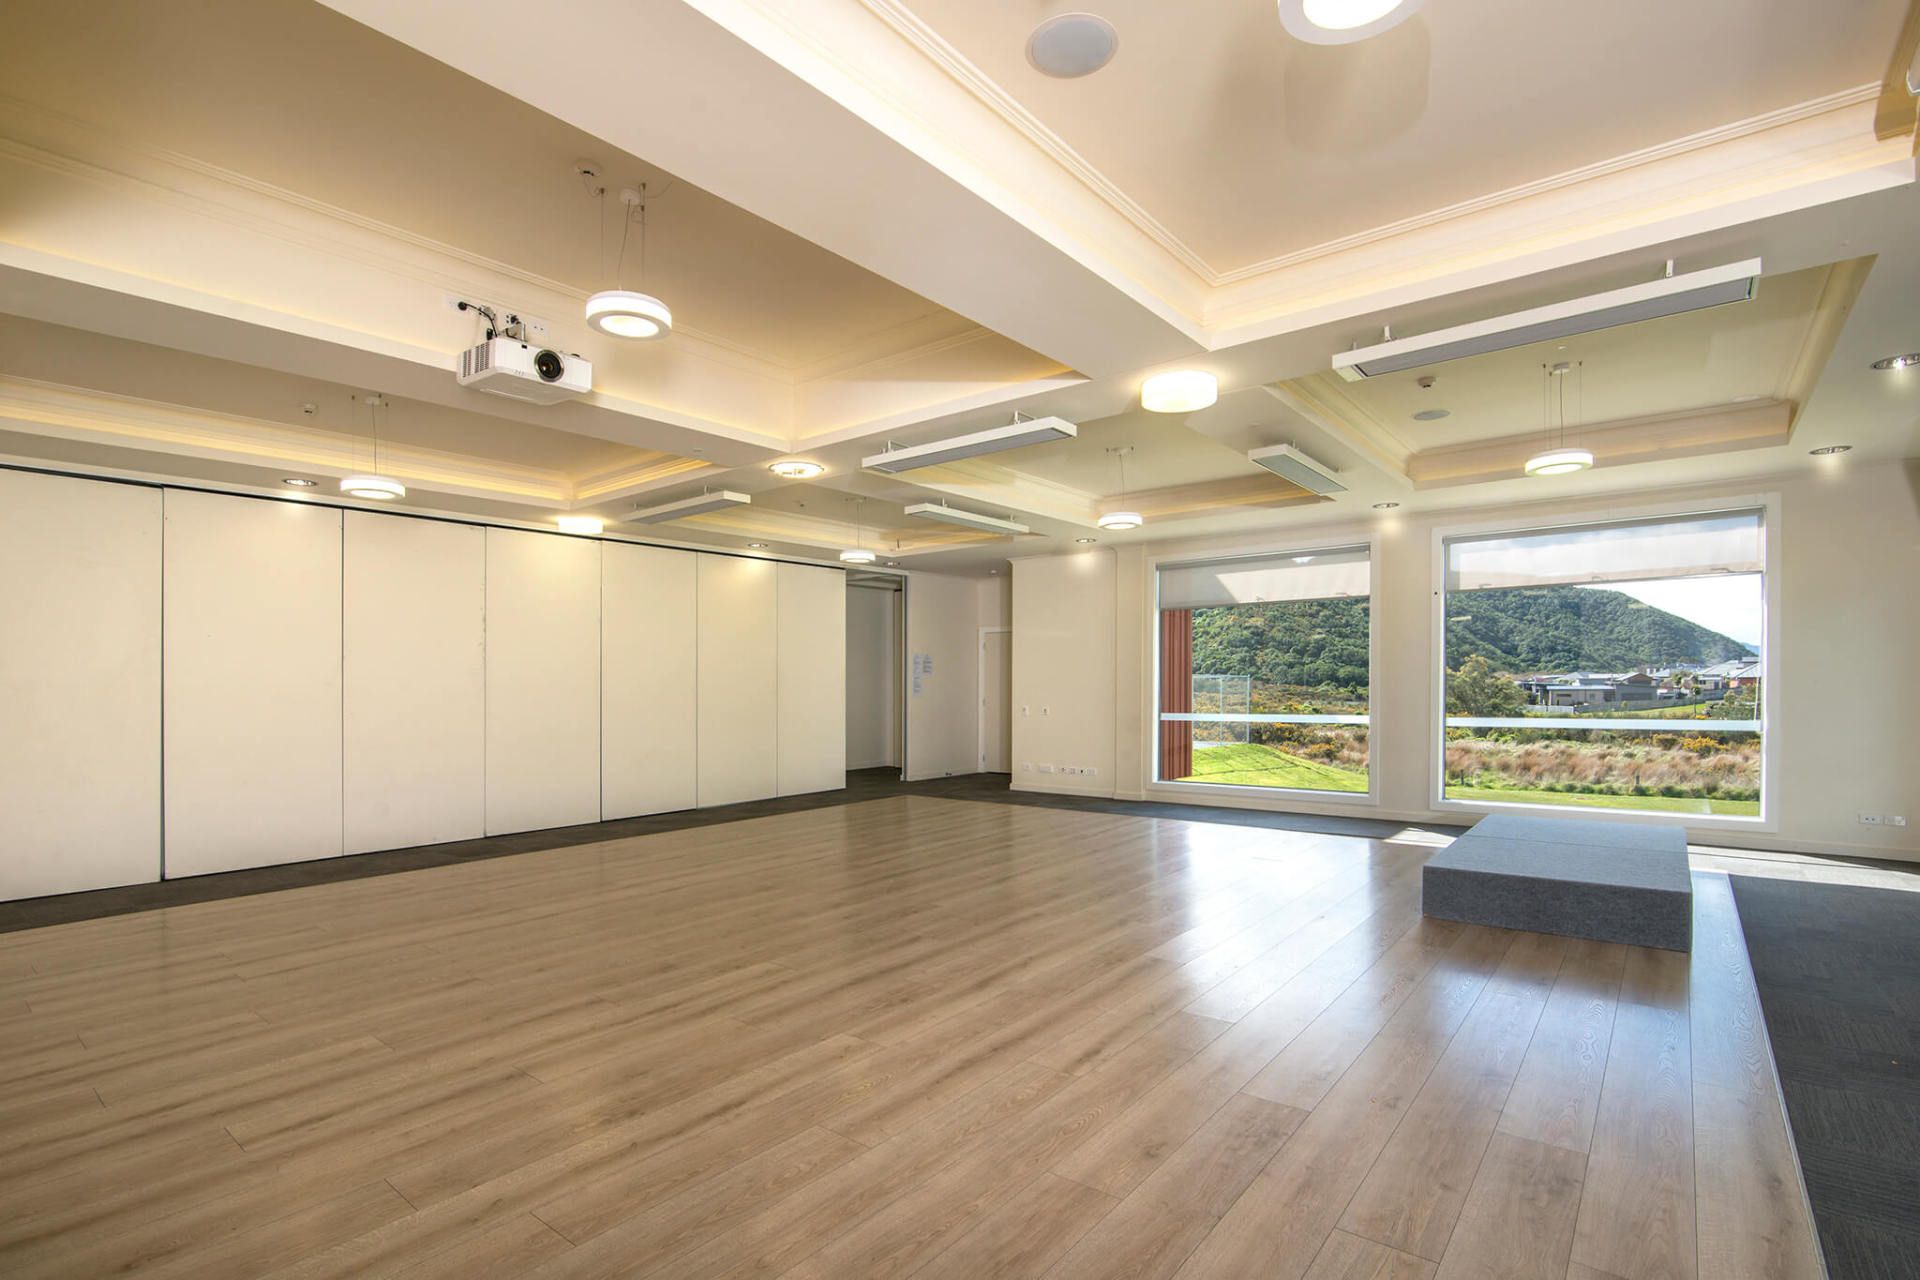 The Ora King Room at Endeavour Park Pavilion in Picton